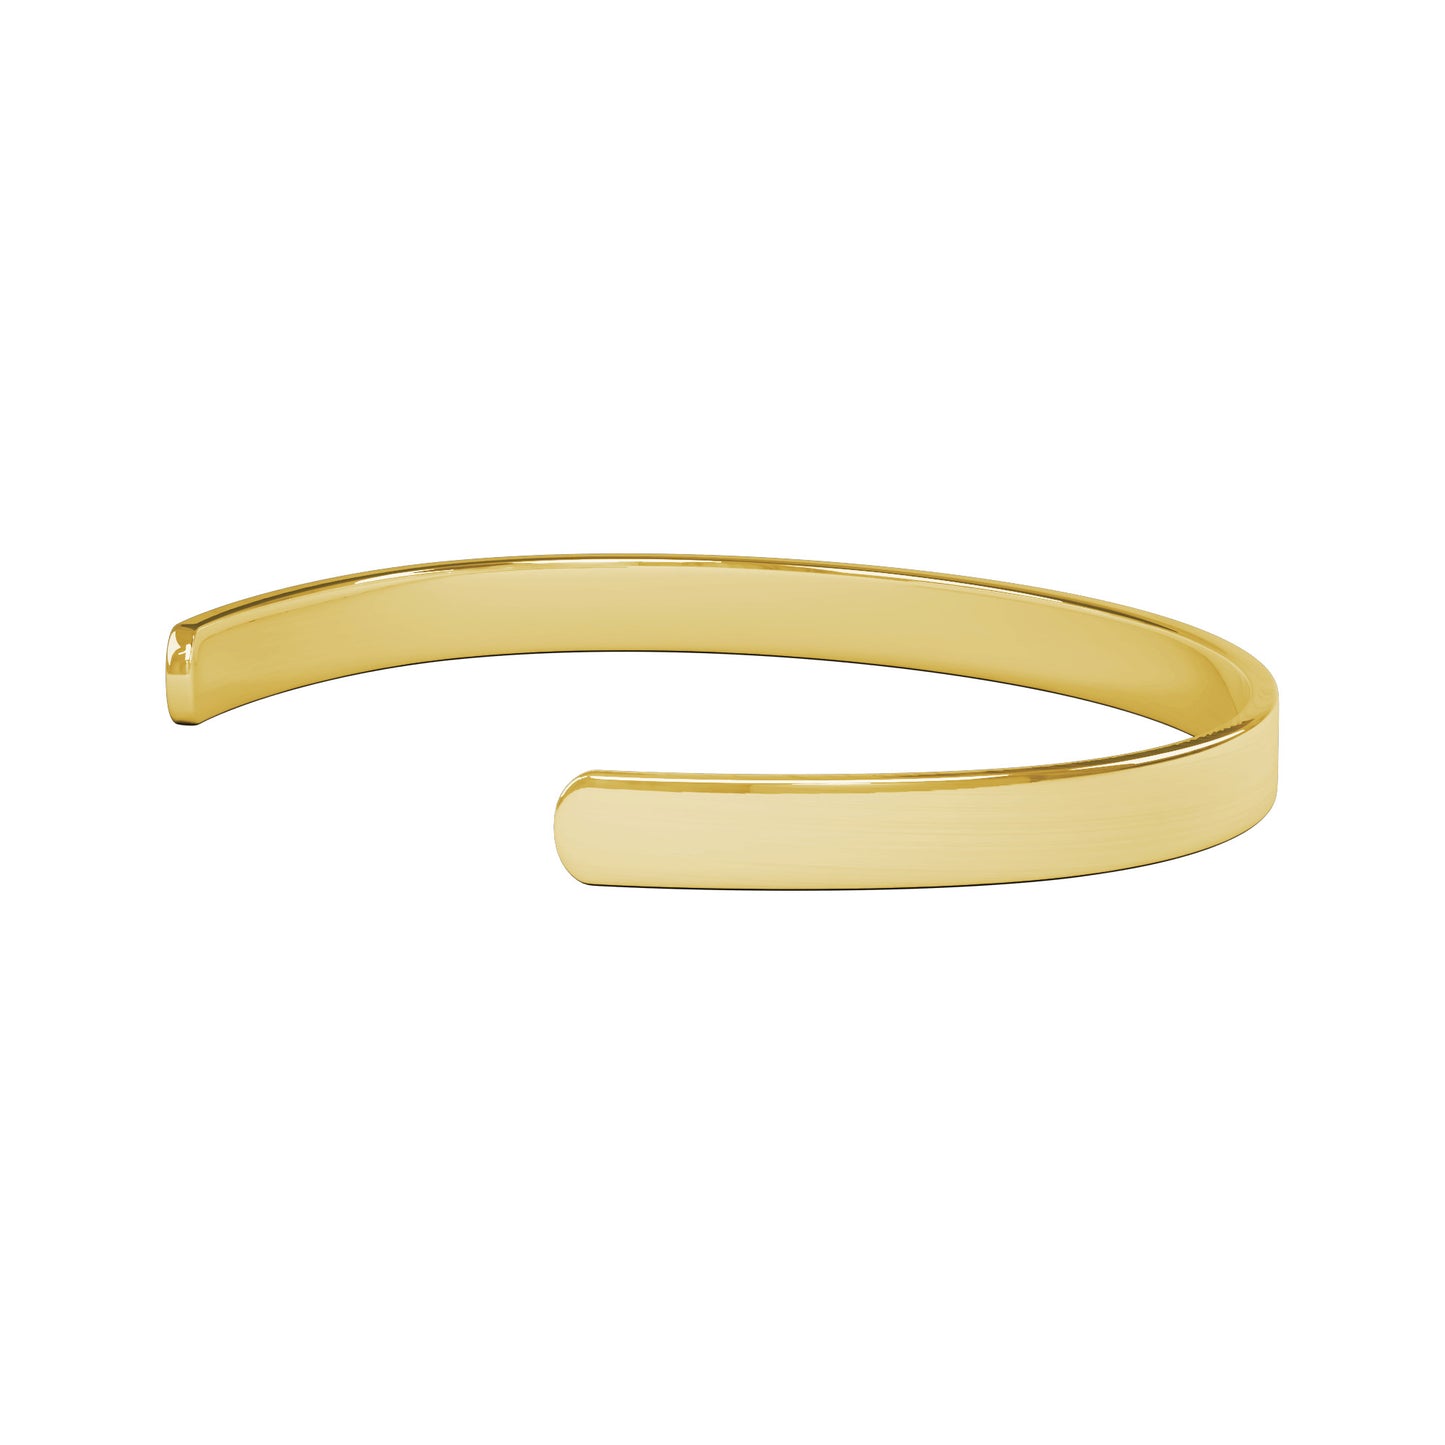 Live Learn and Let Go Cuff Bracelet, Gold, Rose Gold and Silver